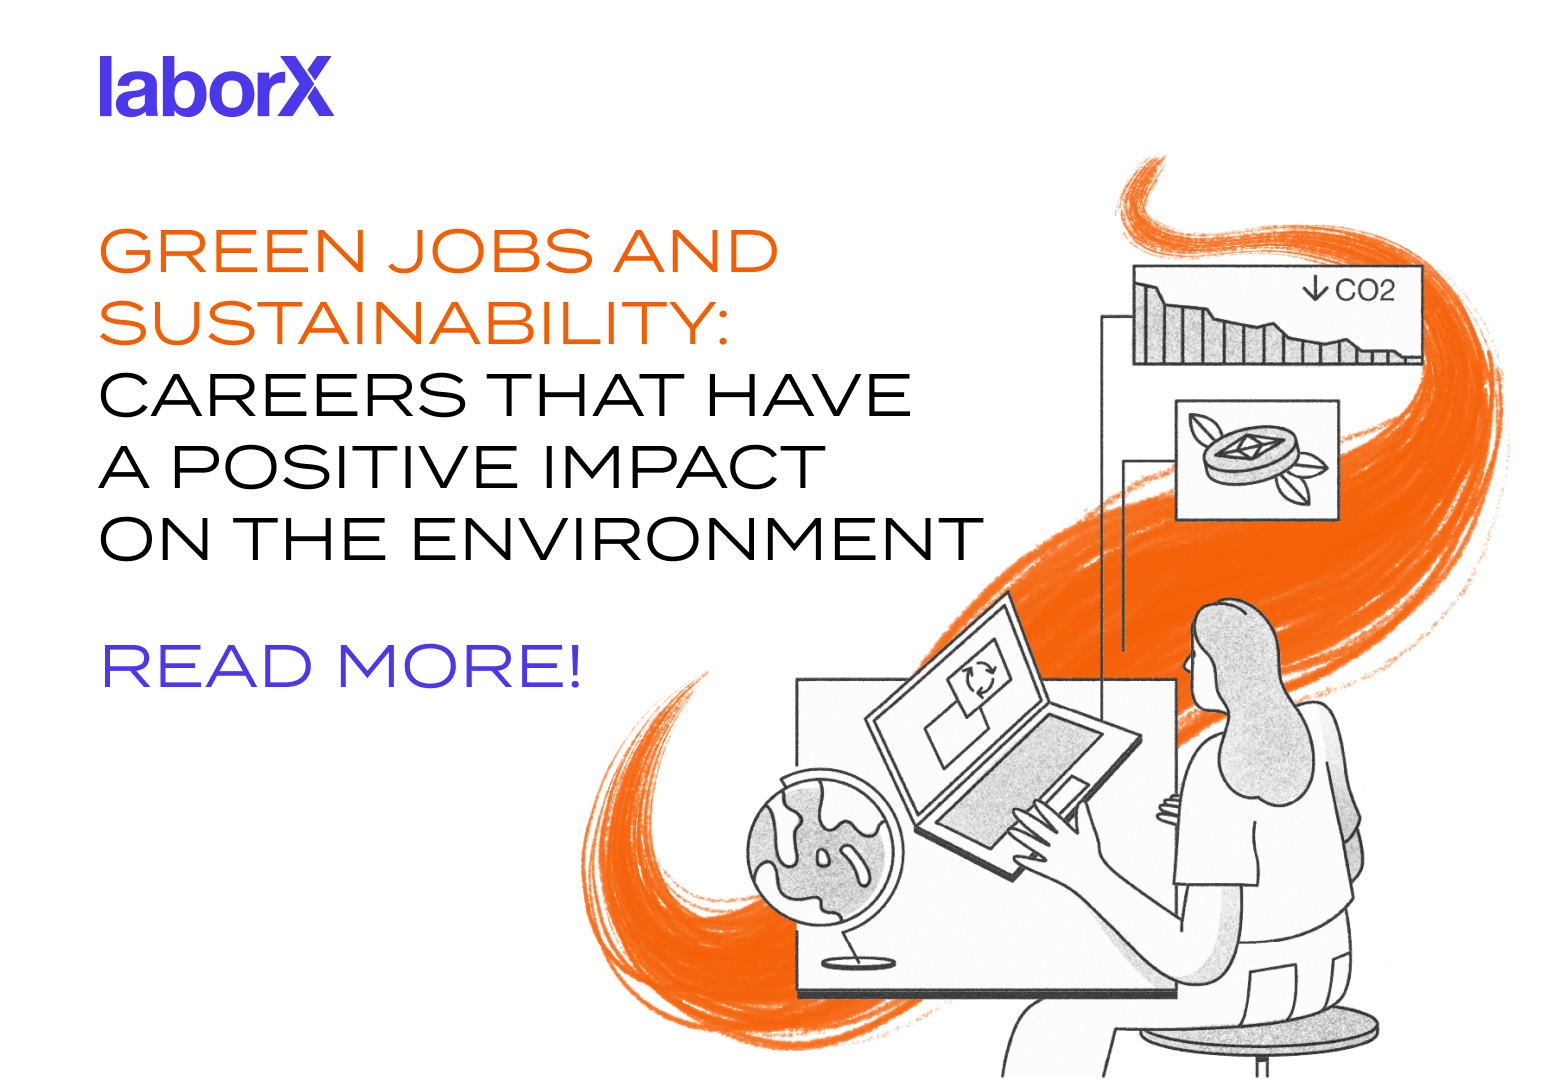 Green Jobs and Sustainability: Careers That Have A Positive Impact on the Environment